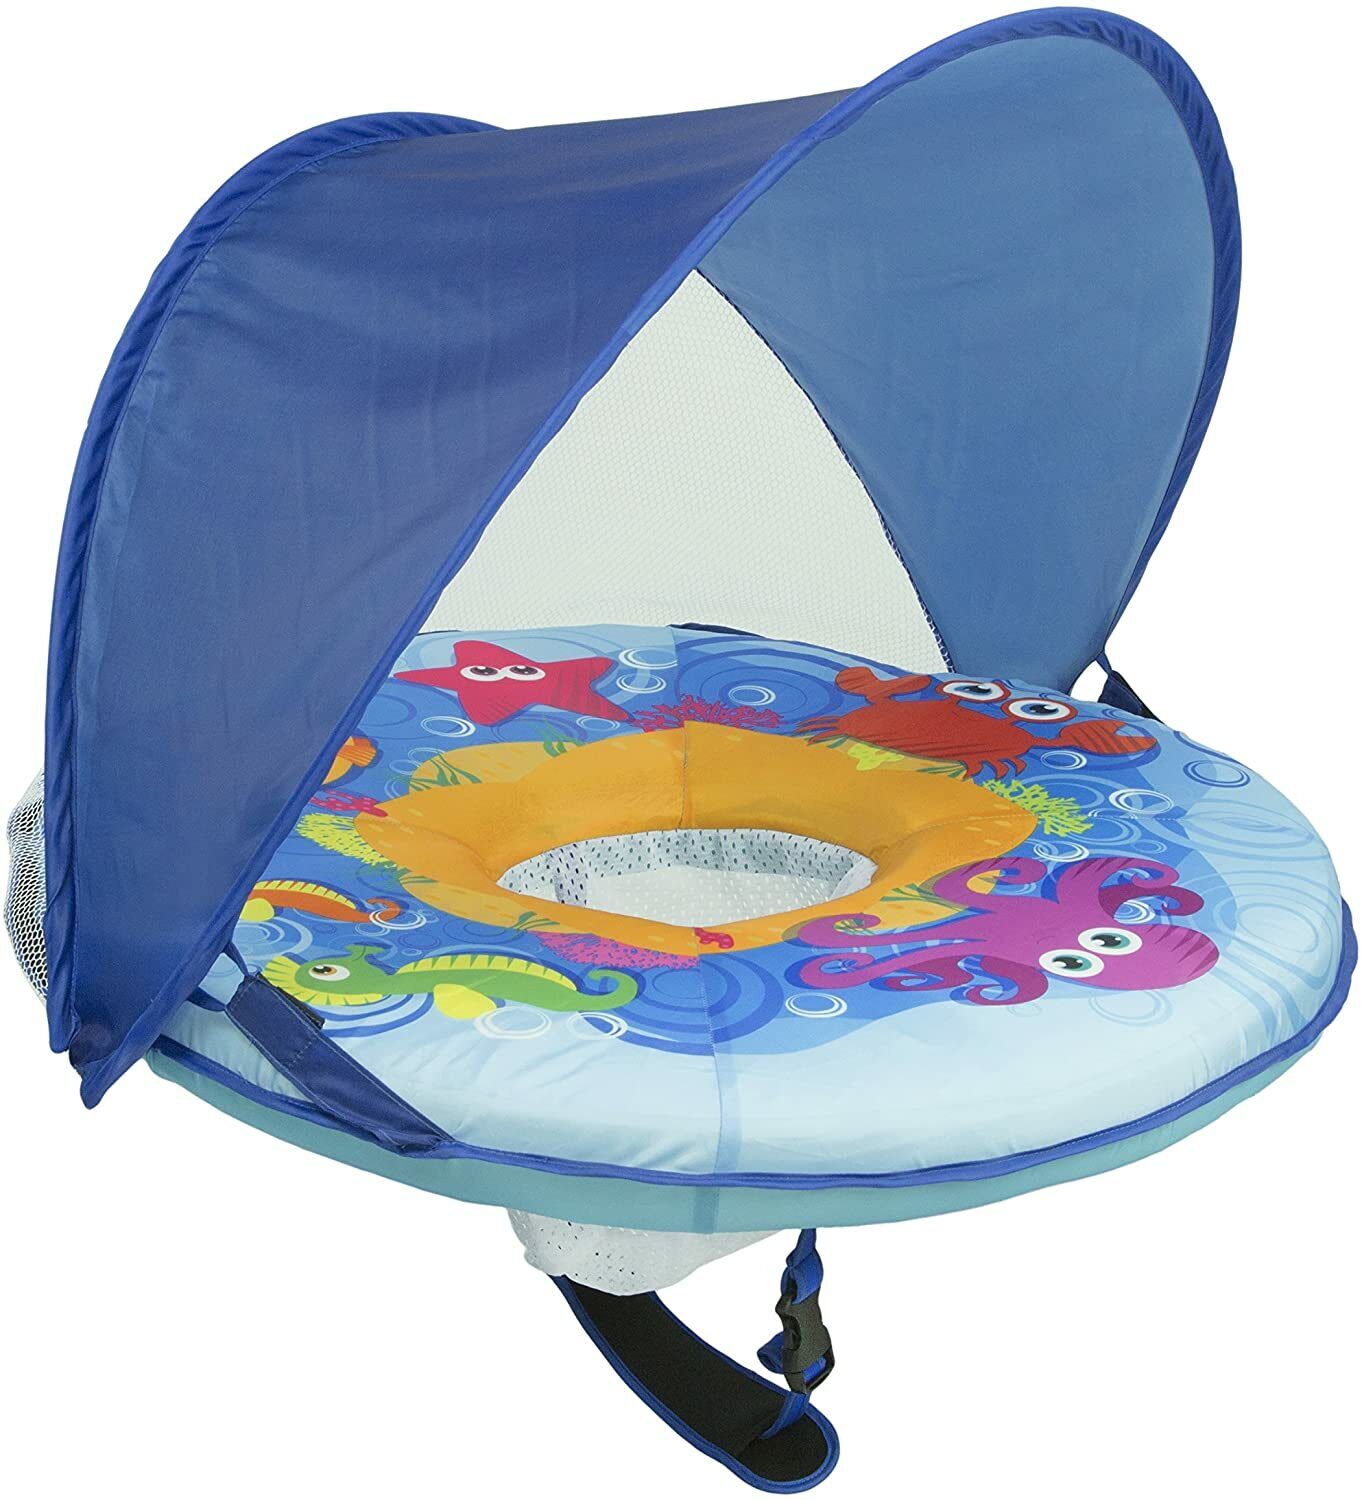 Swim School Self-Inflating Baby Float with Adjustable Canopy - 6-24 Months